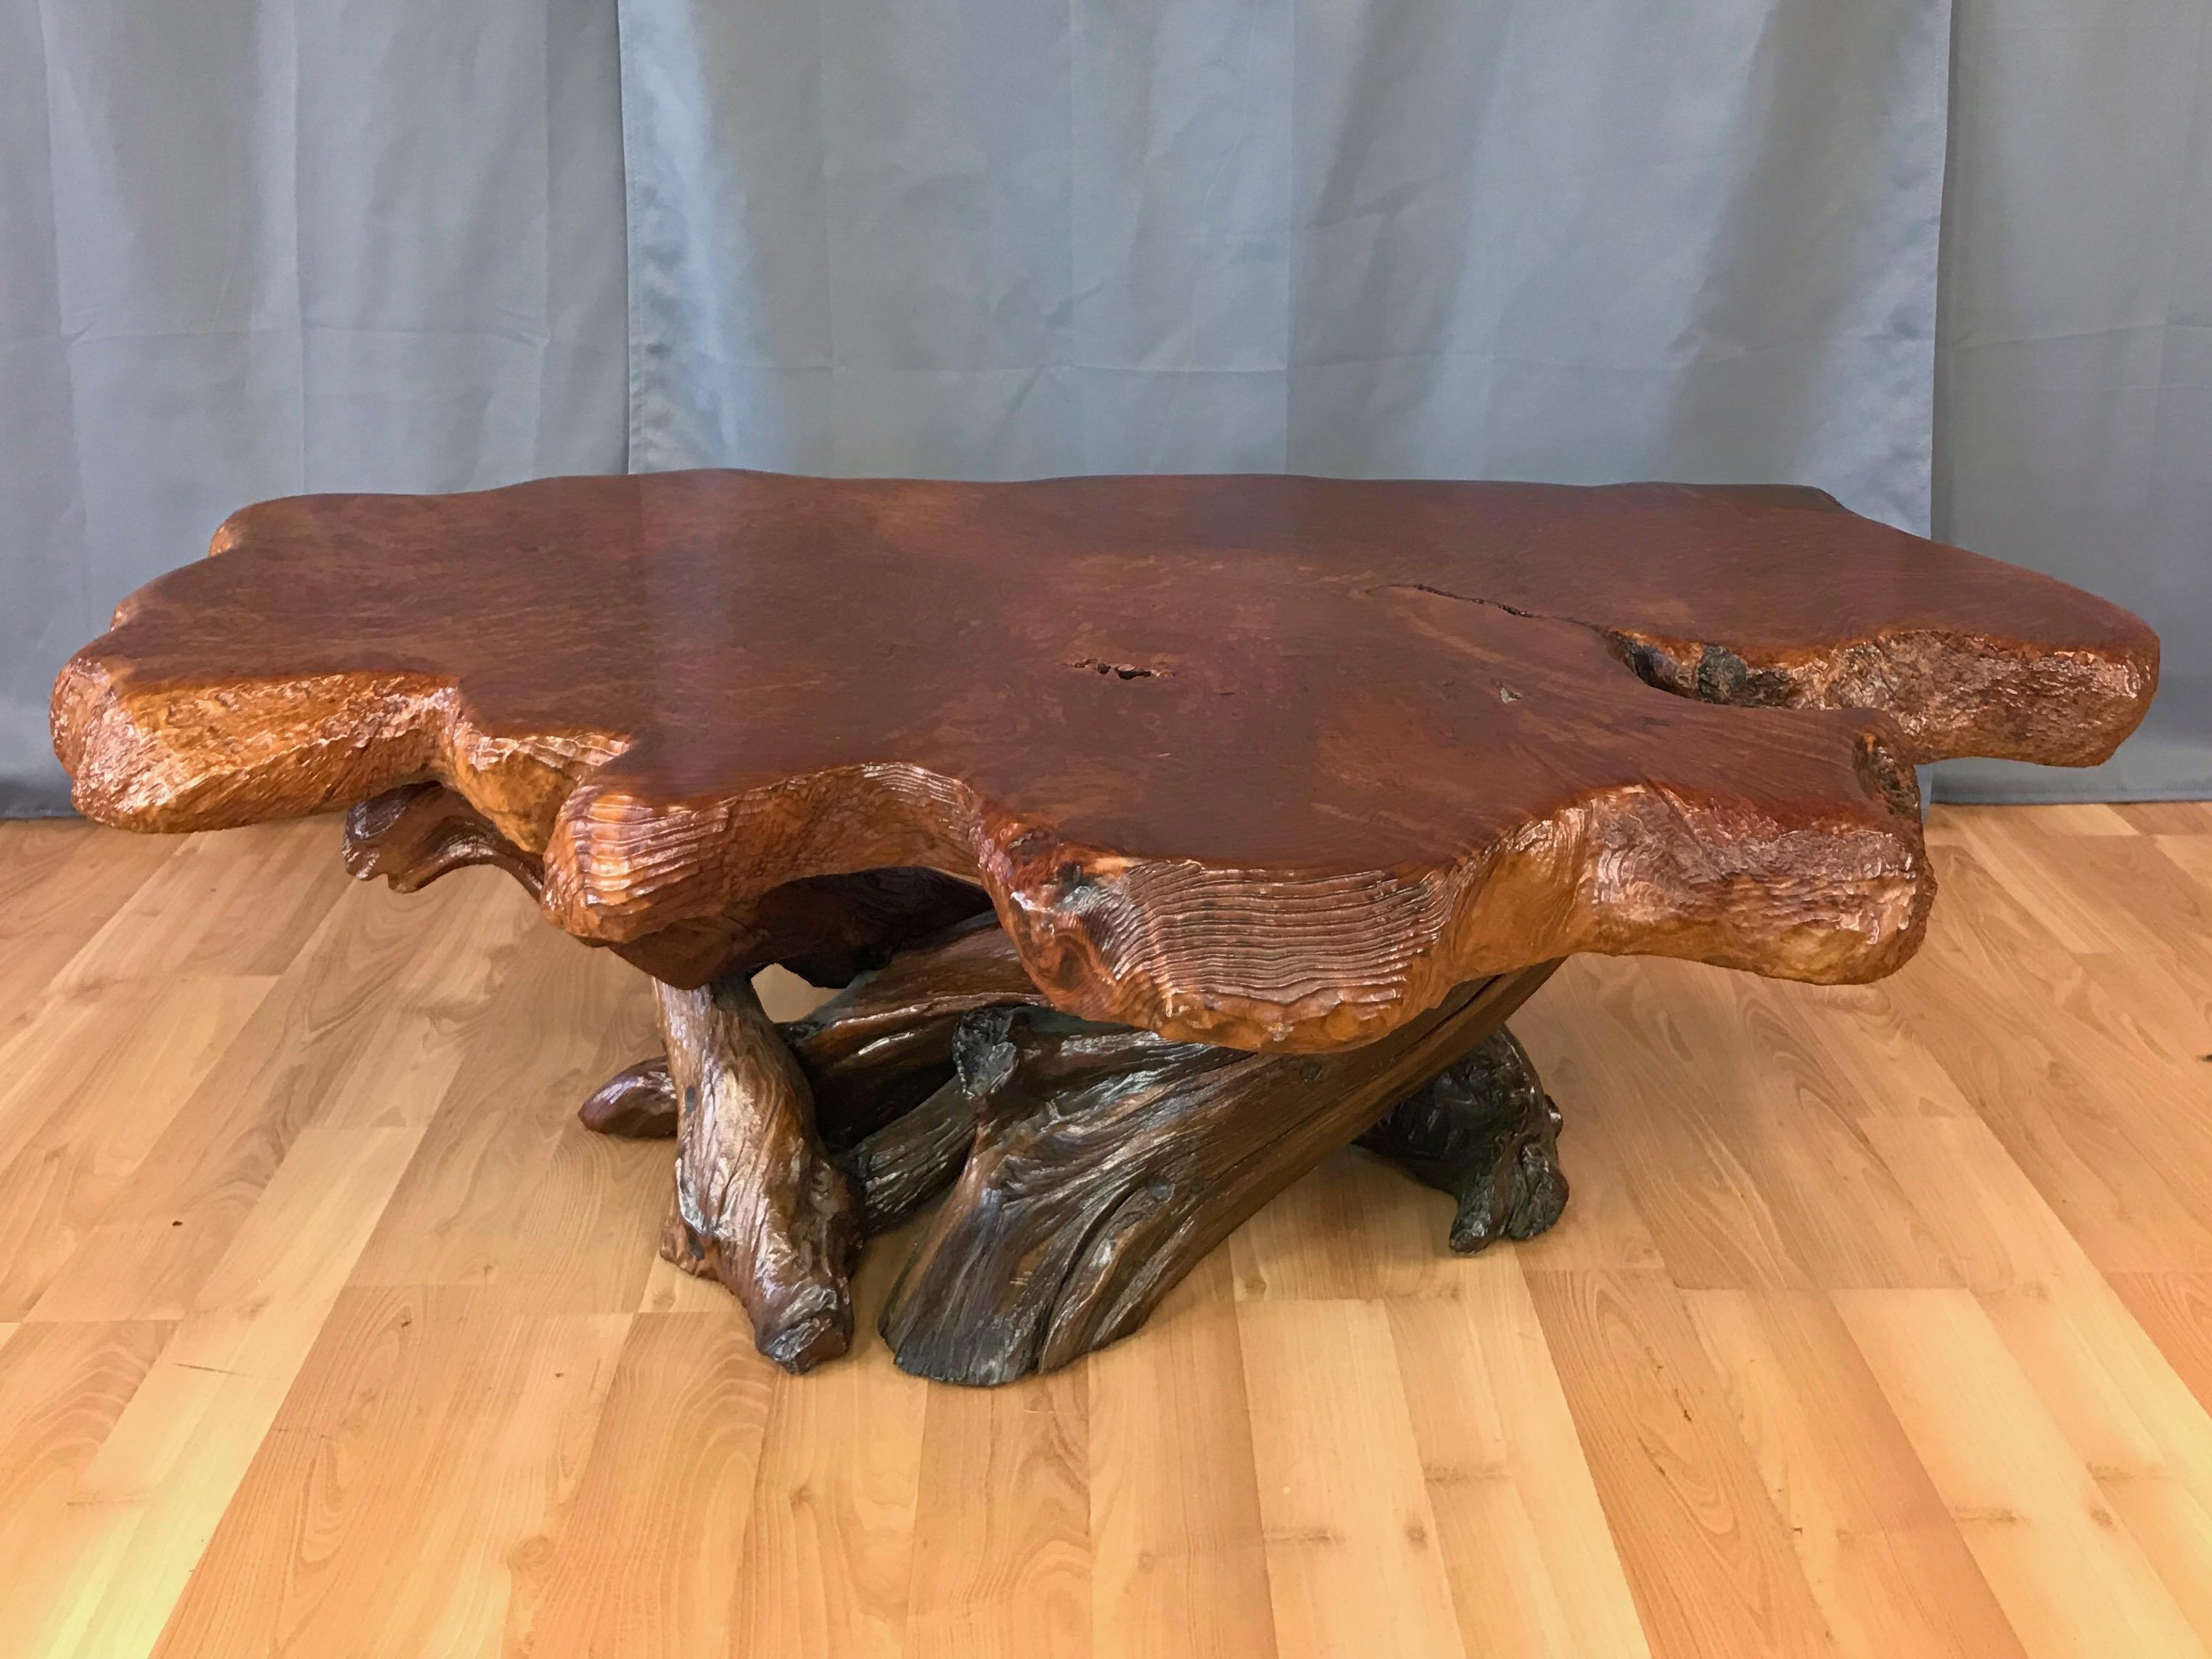 An impressively sized and very well-crafted live edge California redwood burl coffee table with root base.

Substantial three inch-thick slab top with incredibly curly, dense, and dynamic figuring is a striking caramel colored example of an